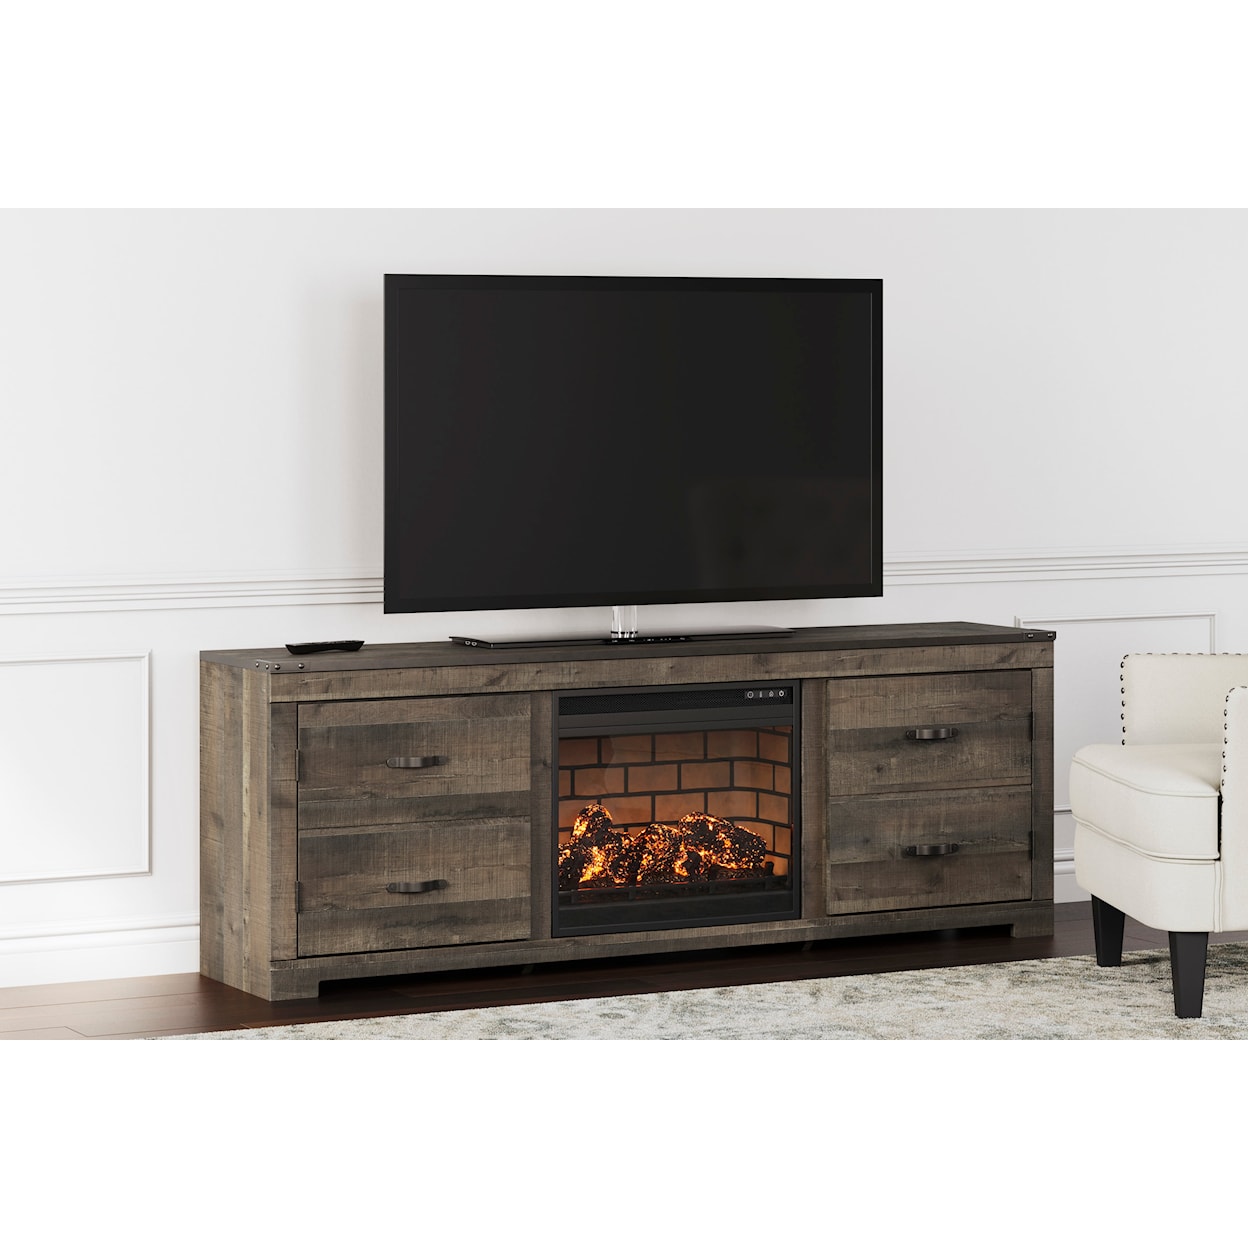 StyleLine KENNY TV Stand with Electric Fireplace